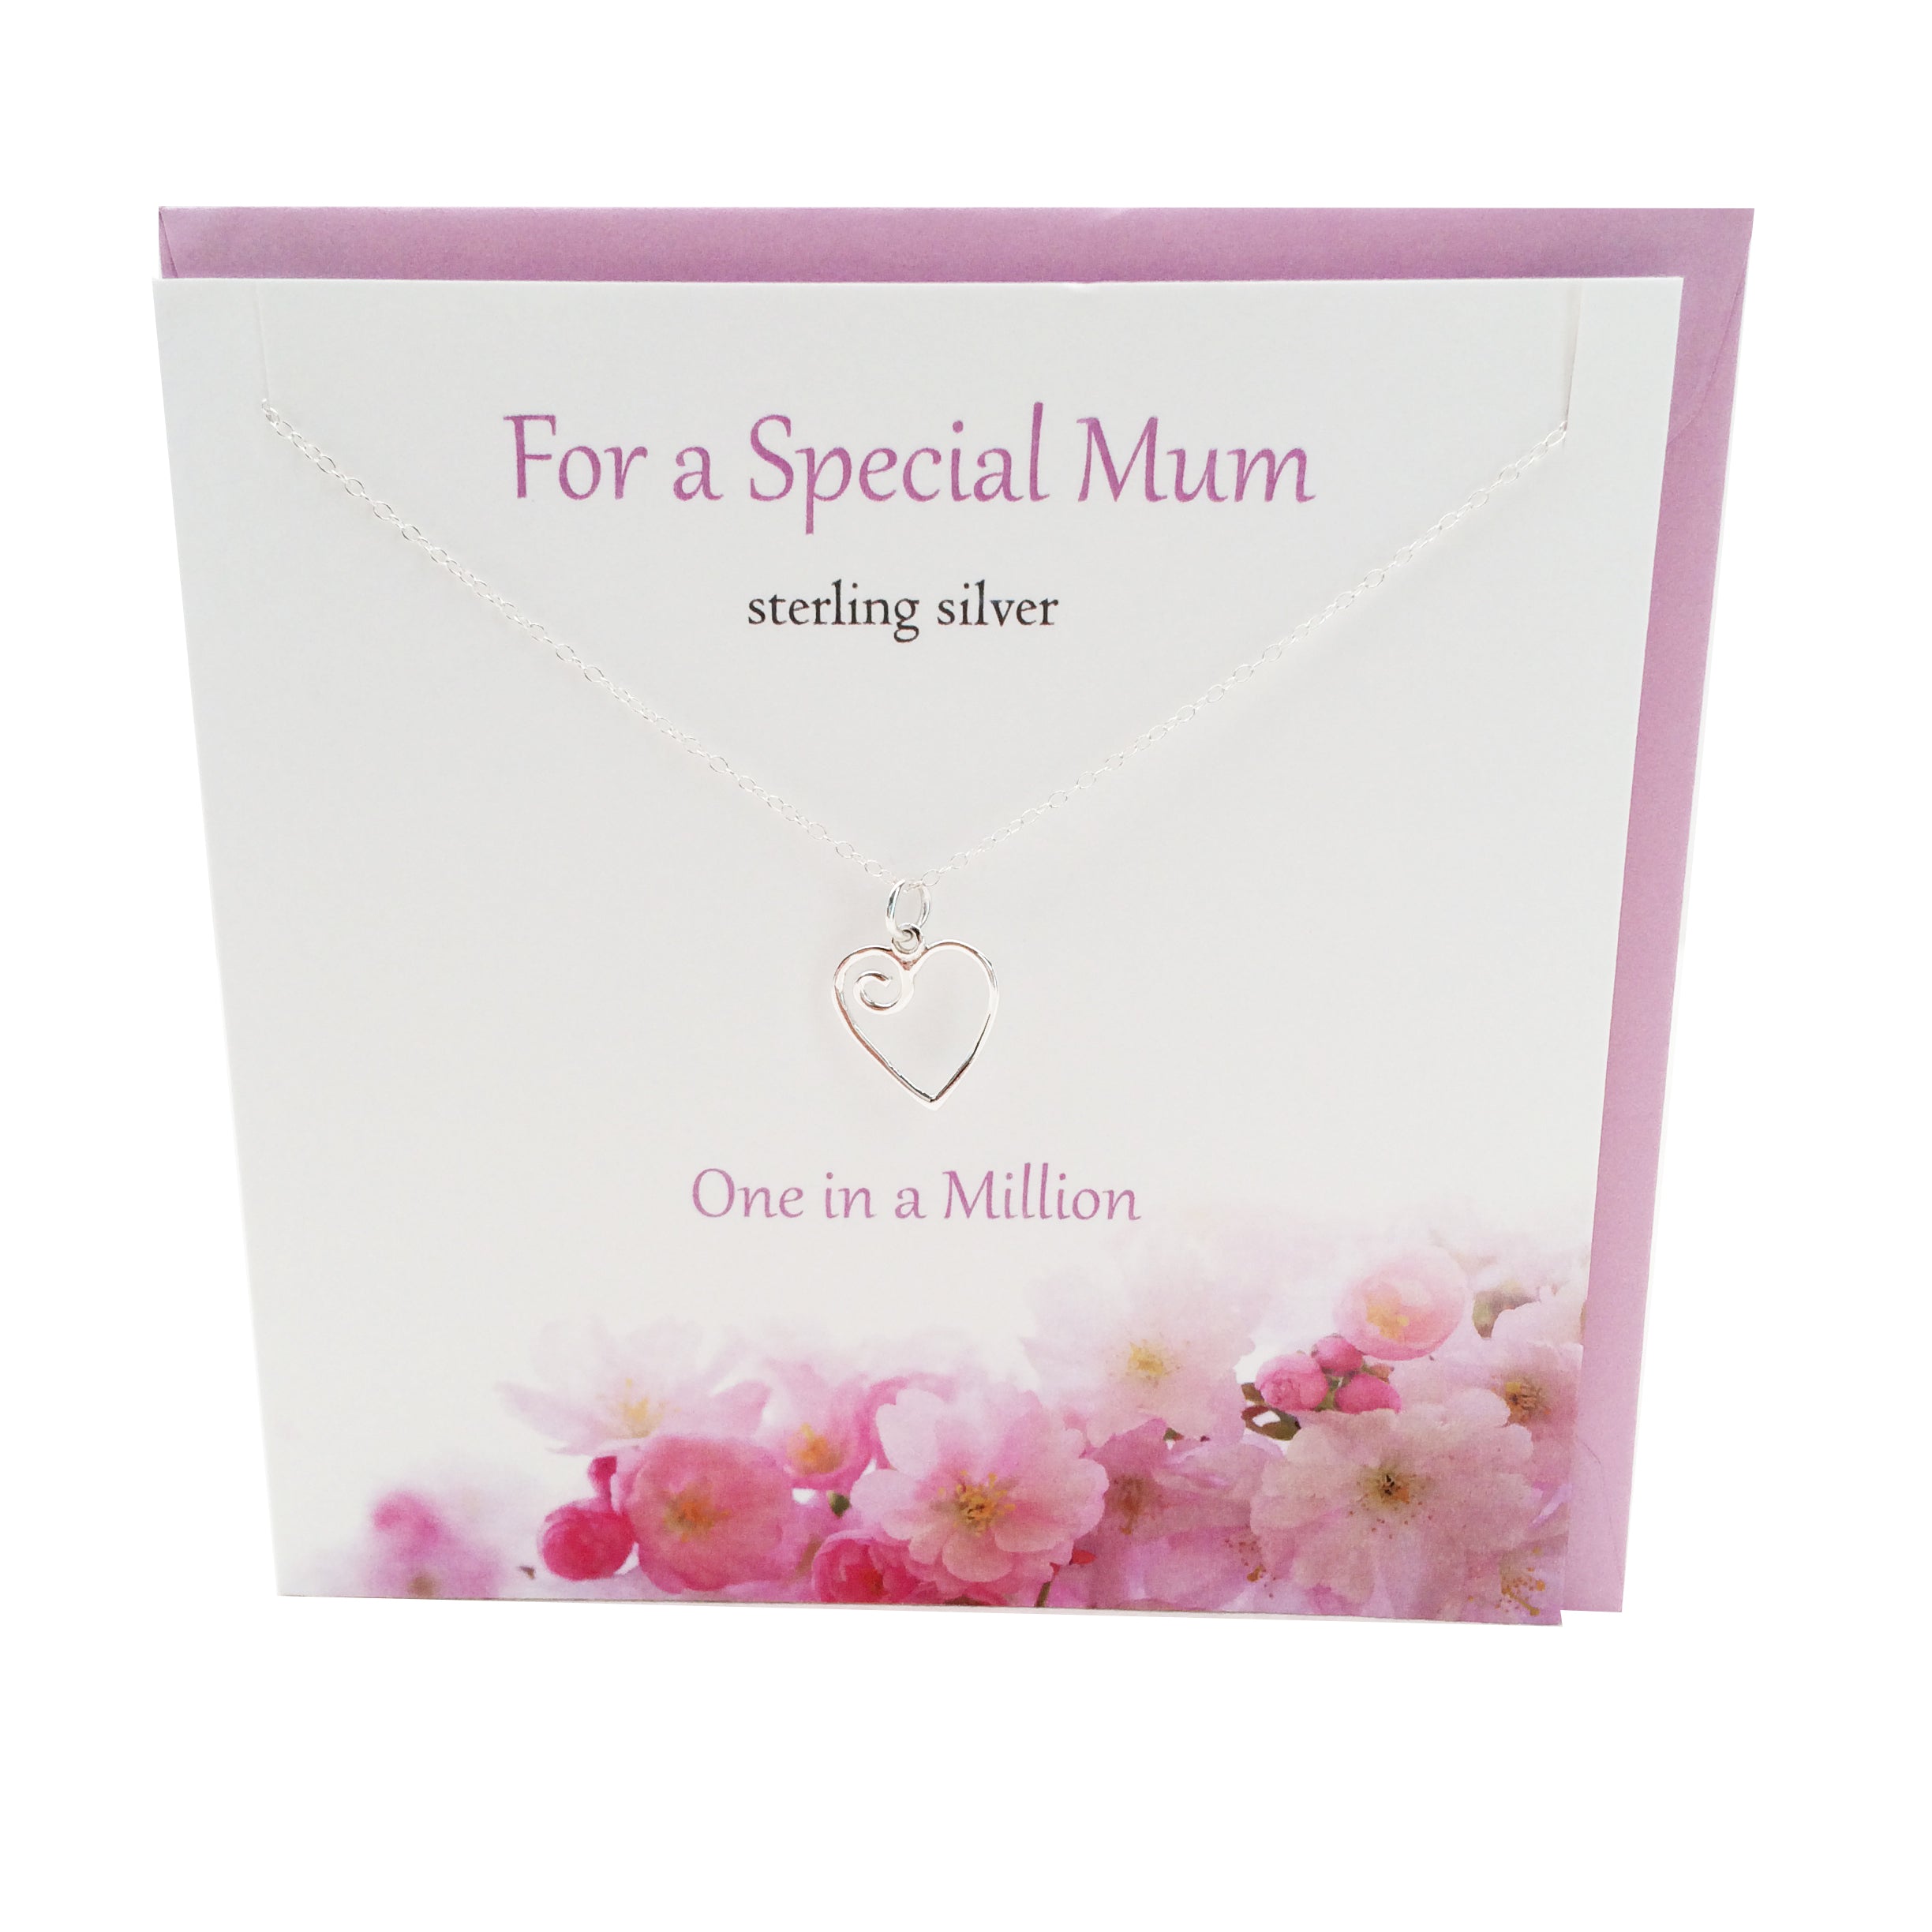 For a Special Mum silver necklace | The Silver Studio Scotland